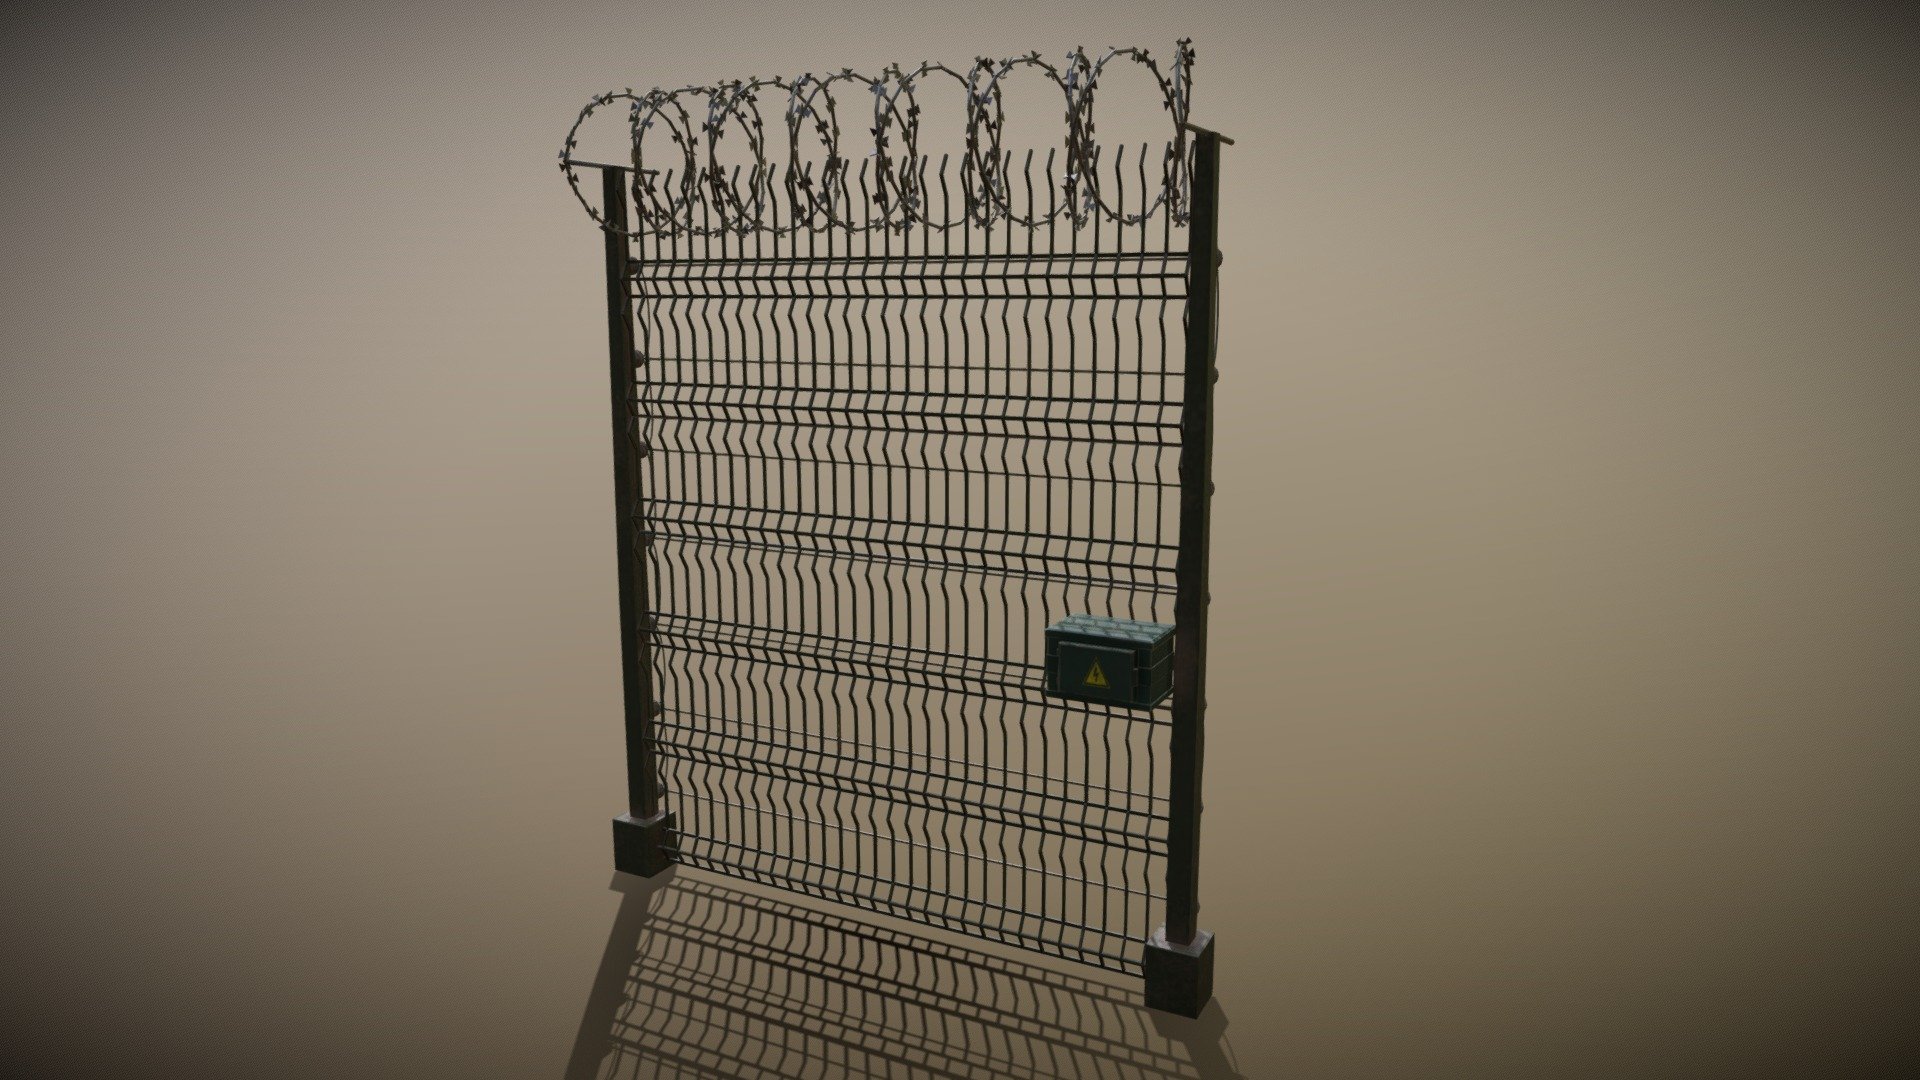 3D model of Barbed Wired Electrified Fence

Be careful, it will neutralize you before you take it out.

PBR texture set with well detalization and occlusion effect. Useful for games or renders 3d model